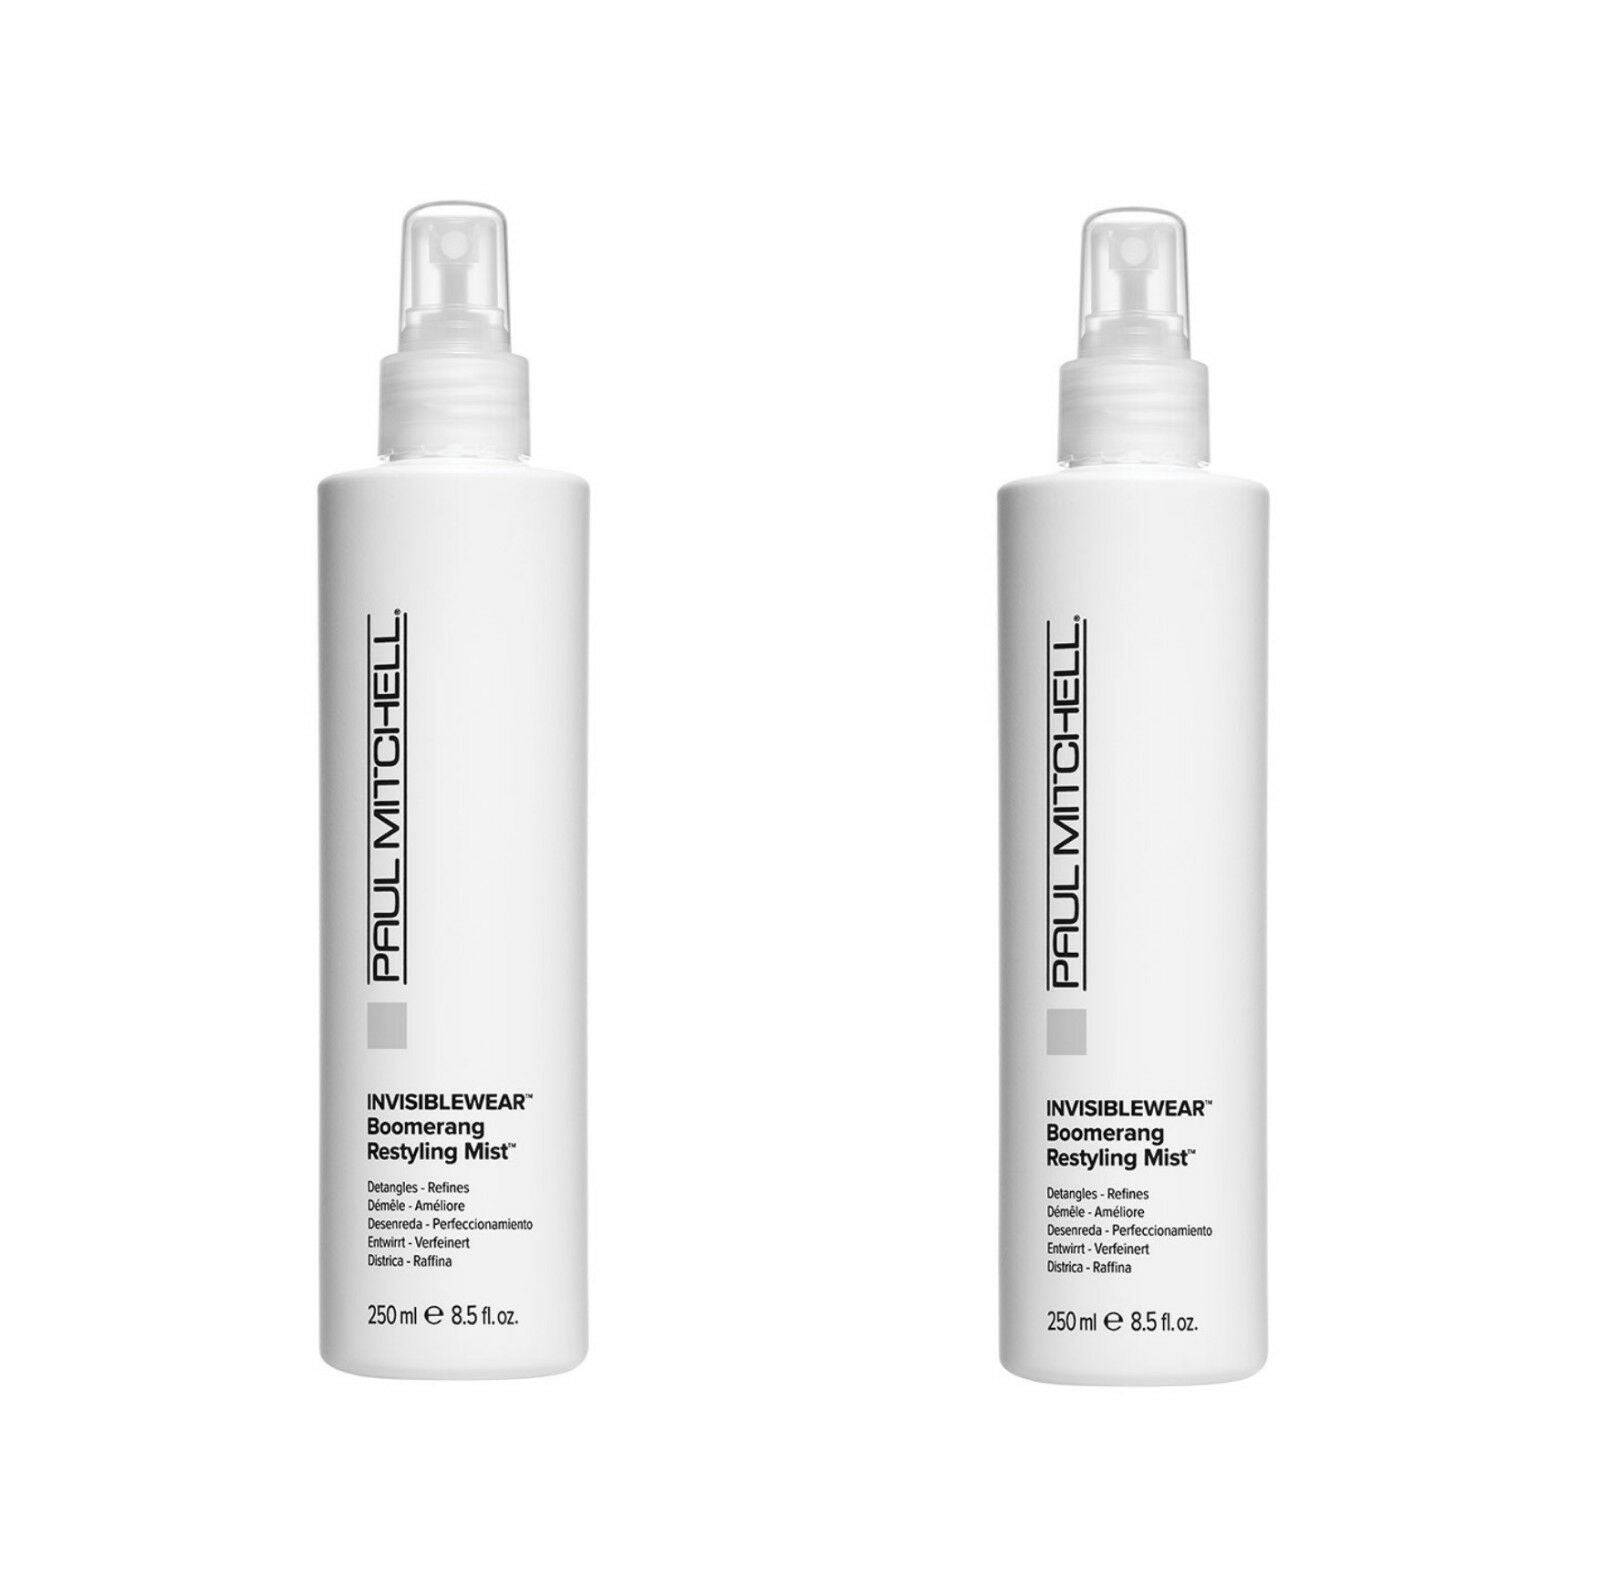 Paul Mitchell InvisiblewearBoomerang Restyling Mist Detangles Revives 250 ml x 2 - On Line Hair Depot